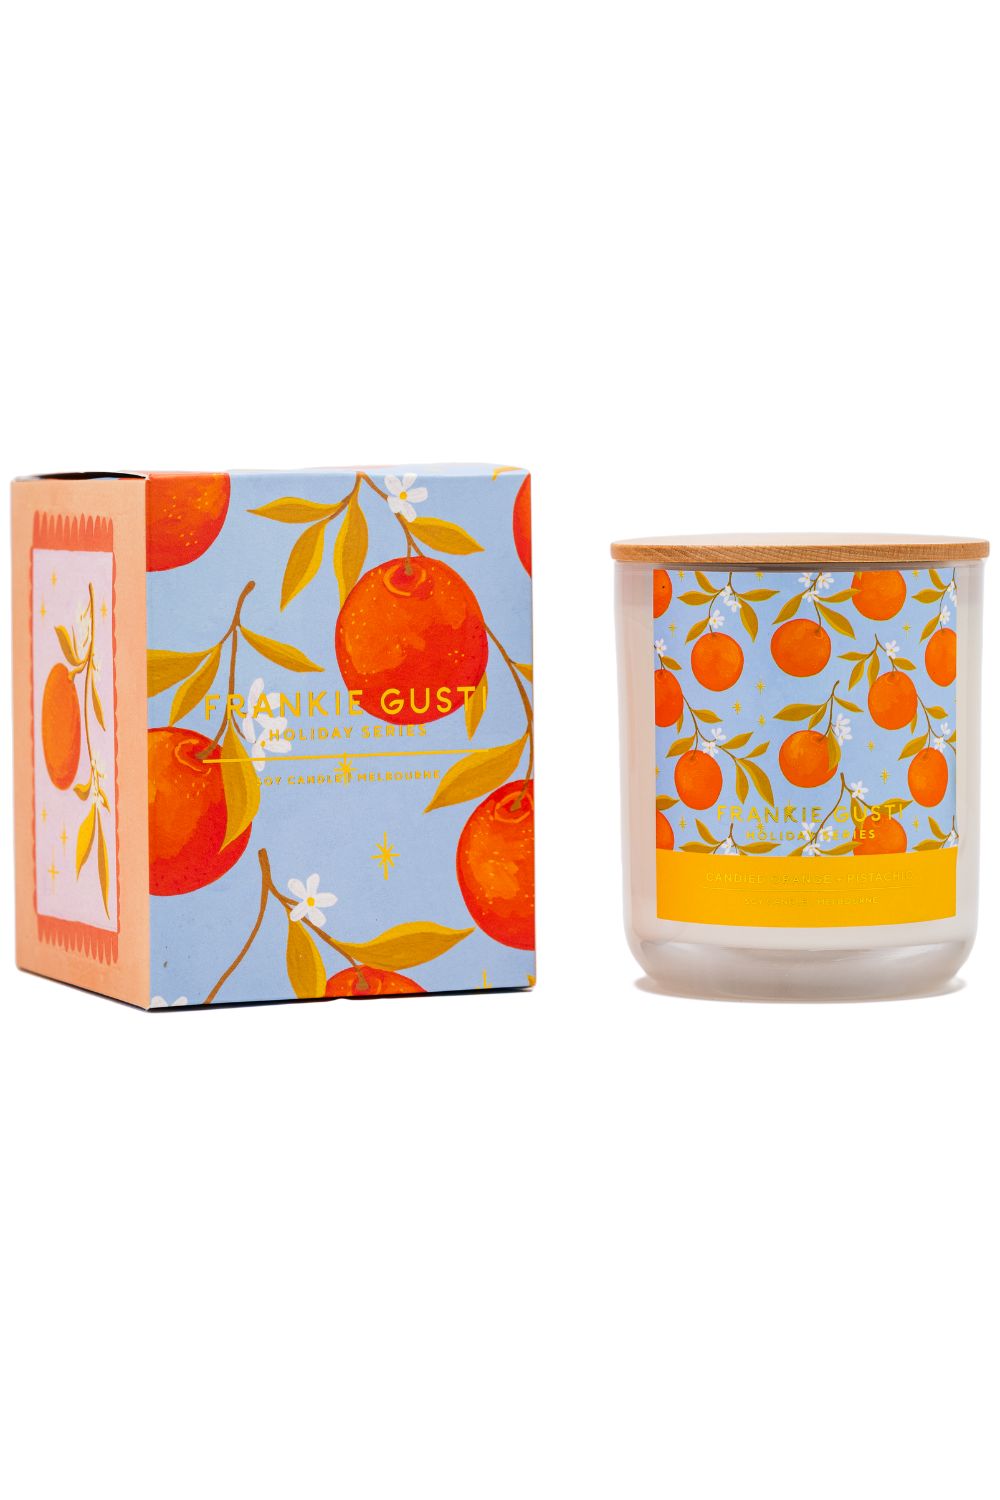 FRANKIE GUSTI | HOLIDAY SERIES CANDLE | CANDIED ORANGE & PISTACHIO